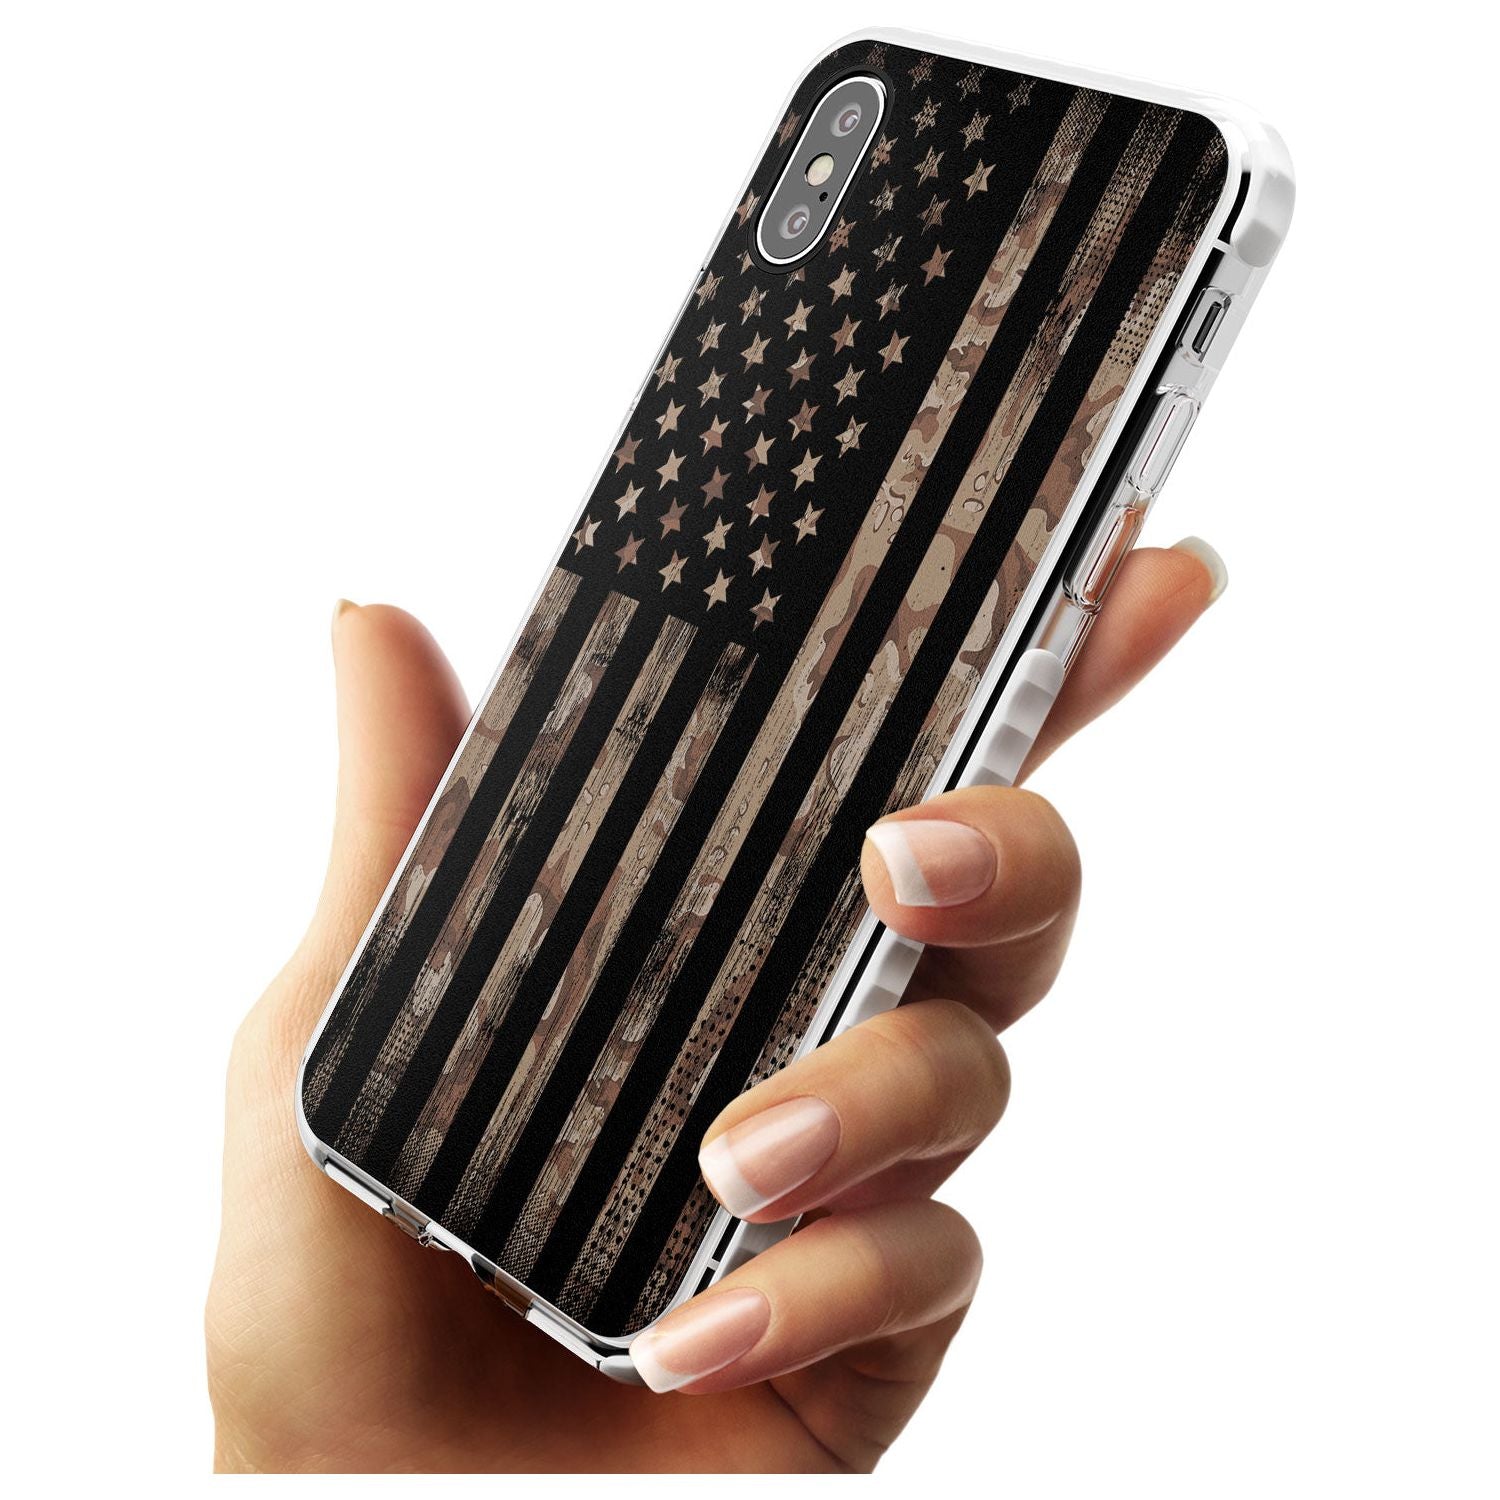 Desert Camo US Flag Impact Phone Case for iPhone X XS Max XR